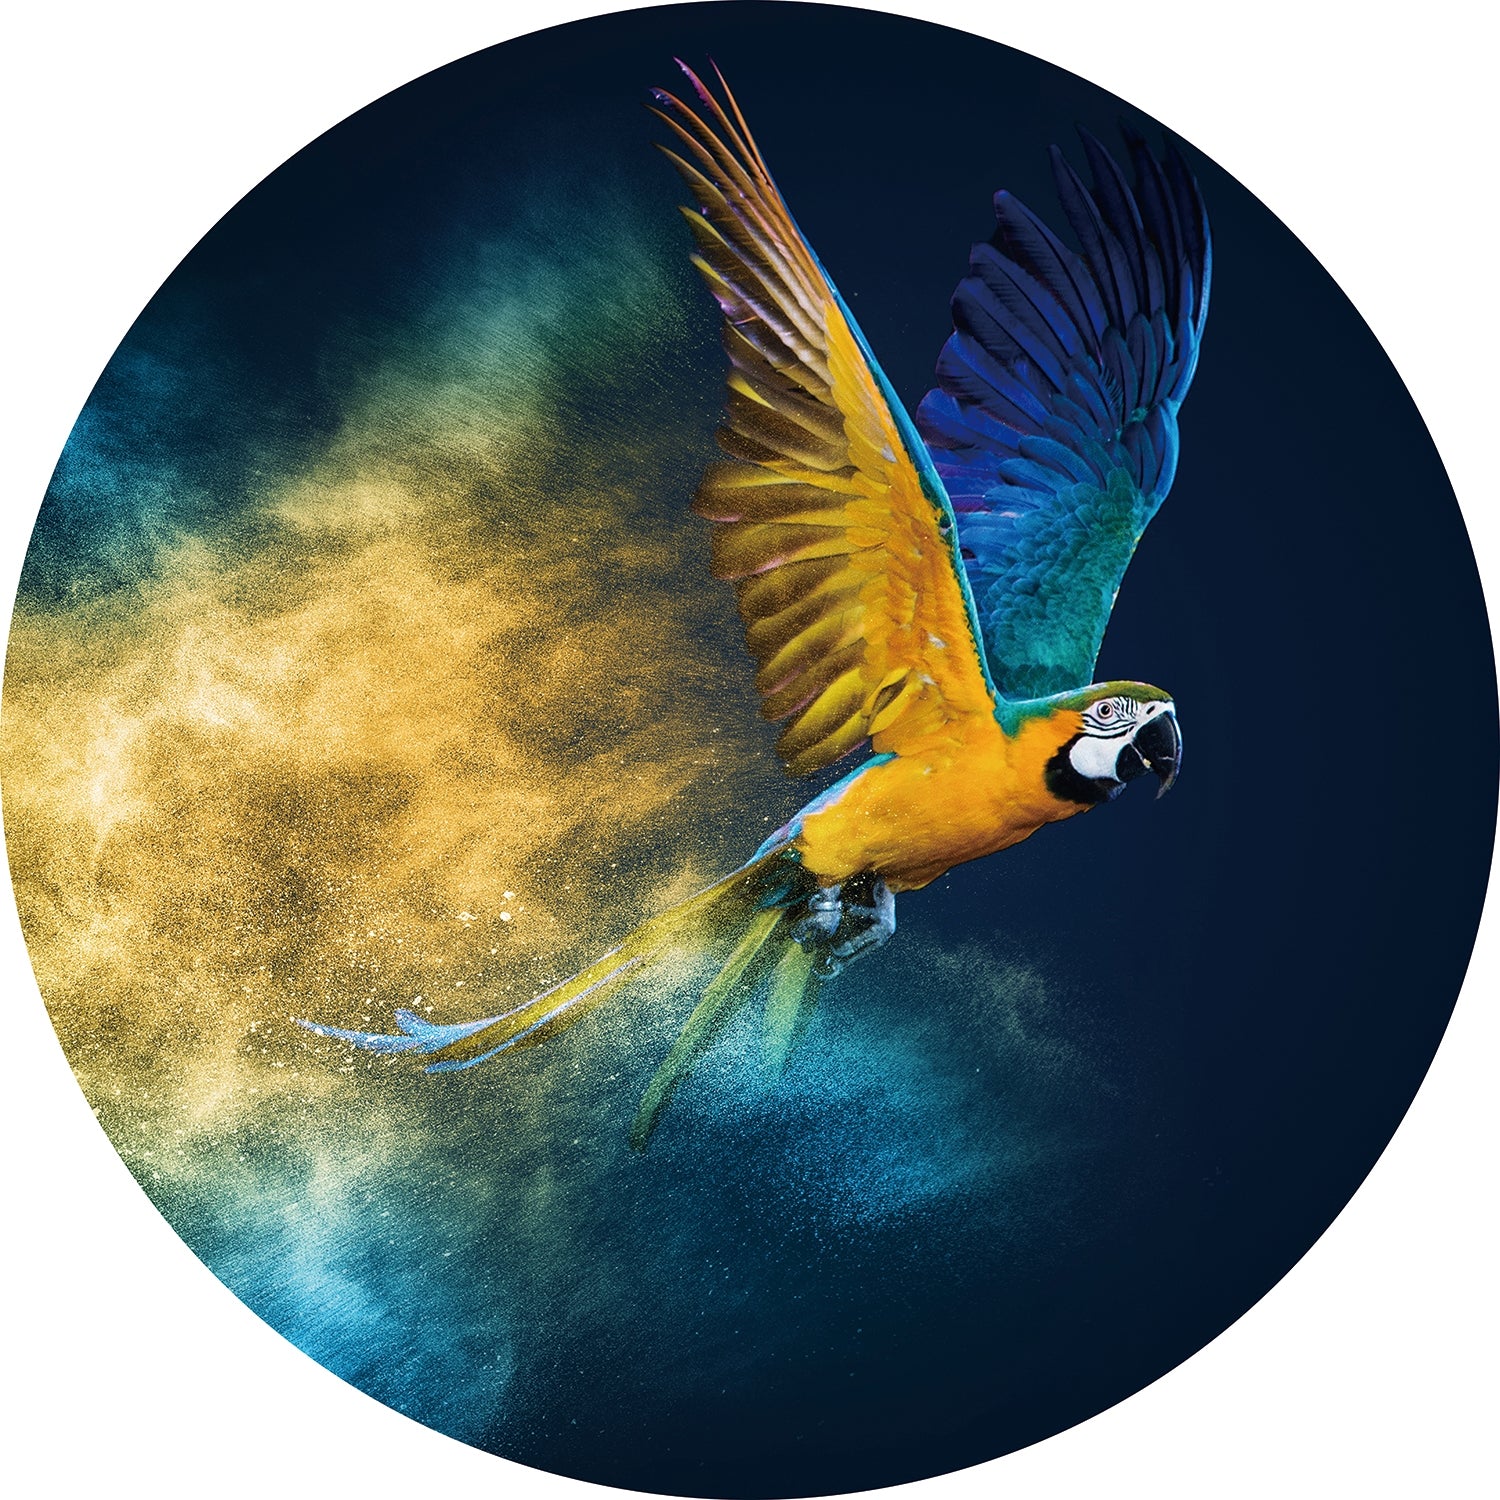 Parrot - Extra large round glass painting